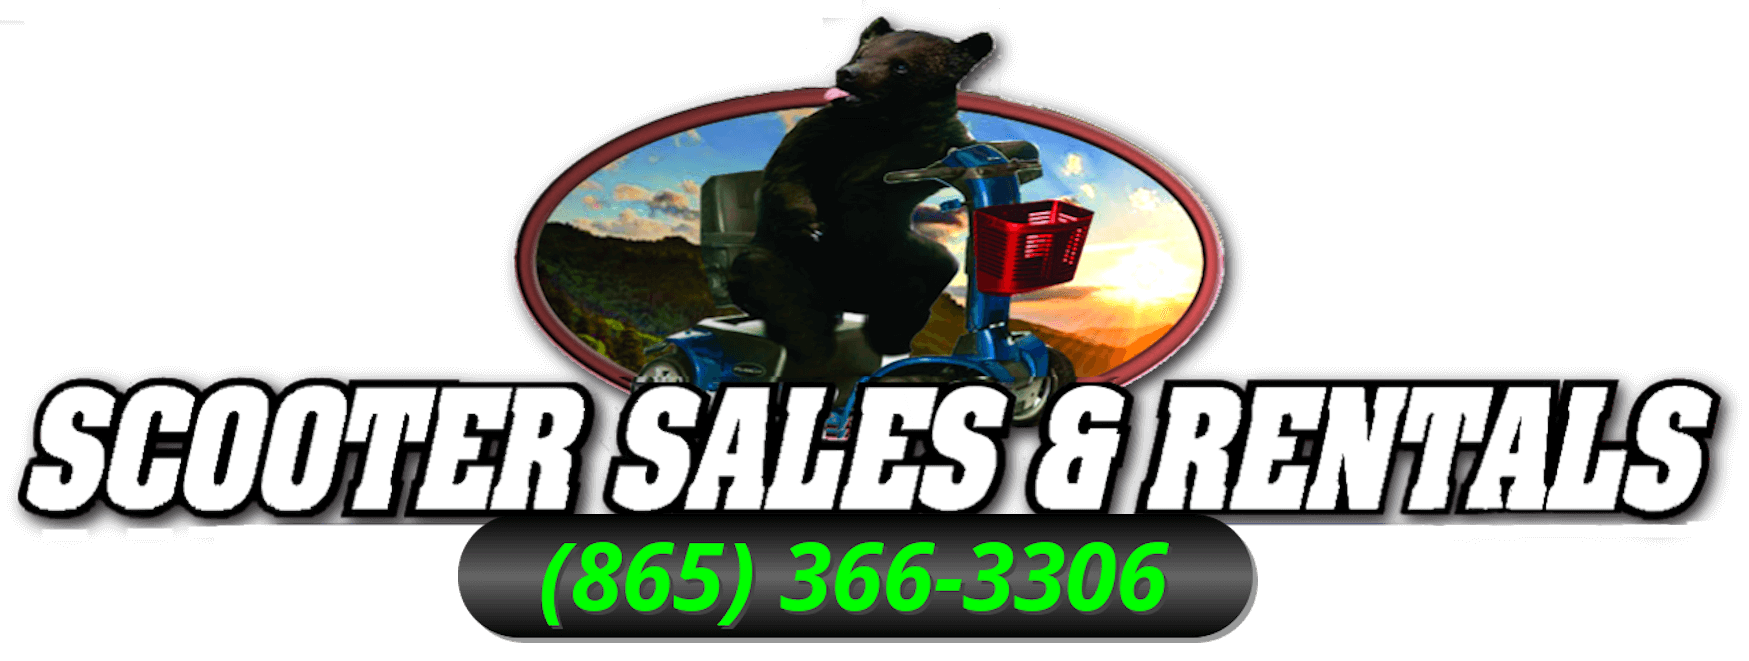 Scooter Sales and Rentals Logo